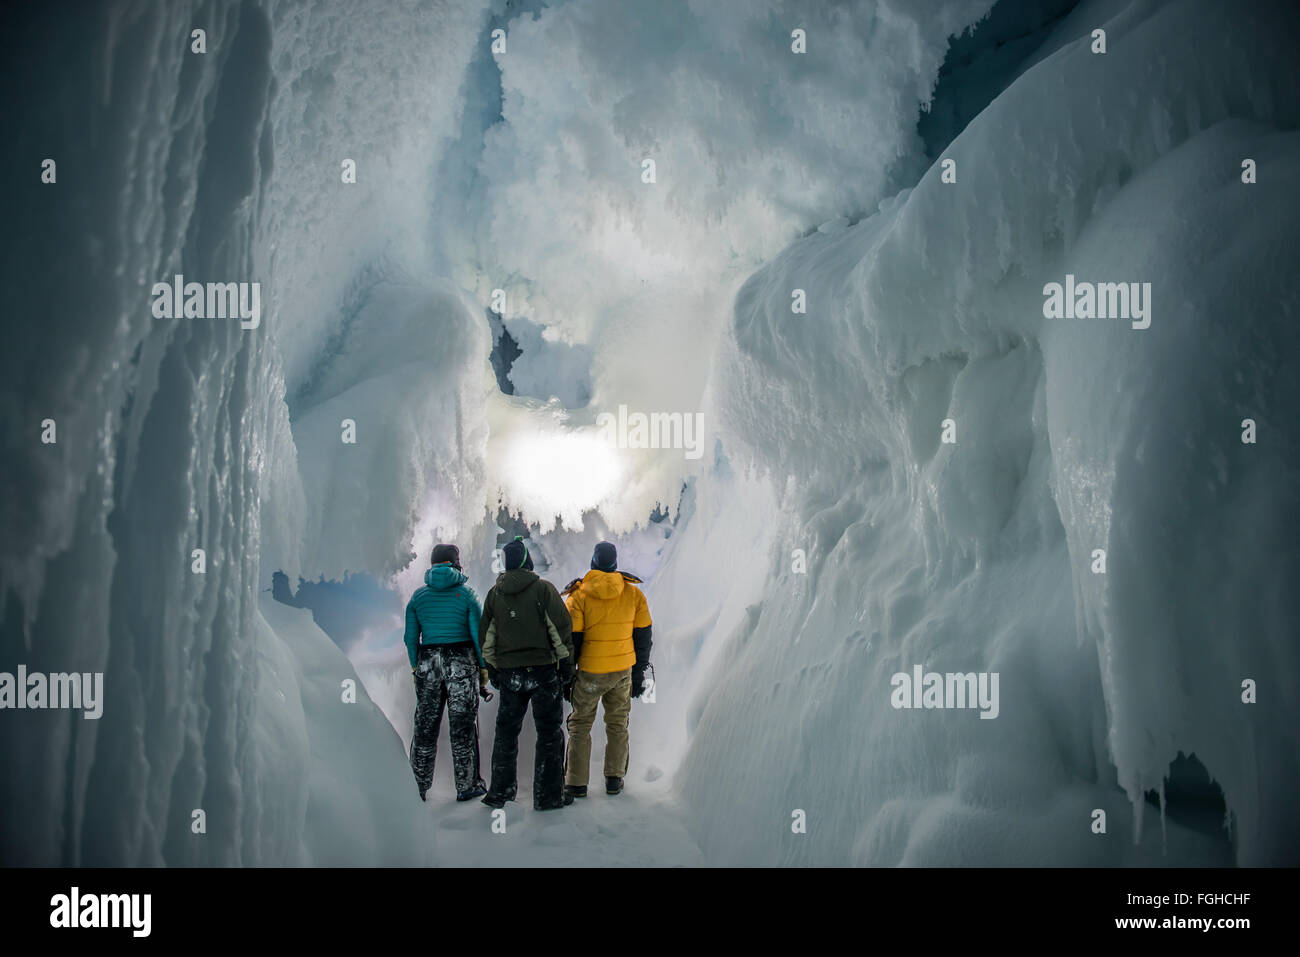 Exploration of an ice cave in Antarctica. Stock Photo